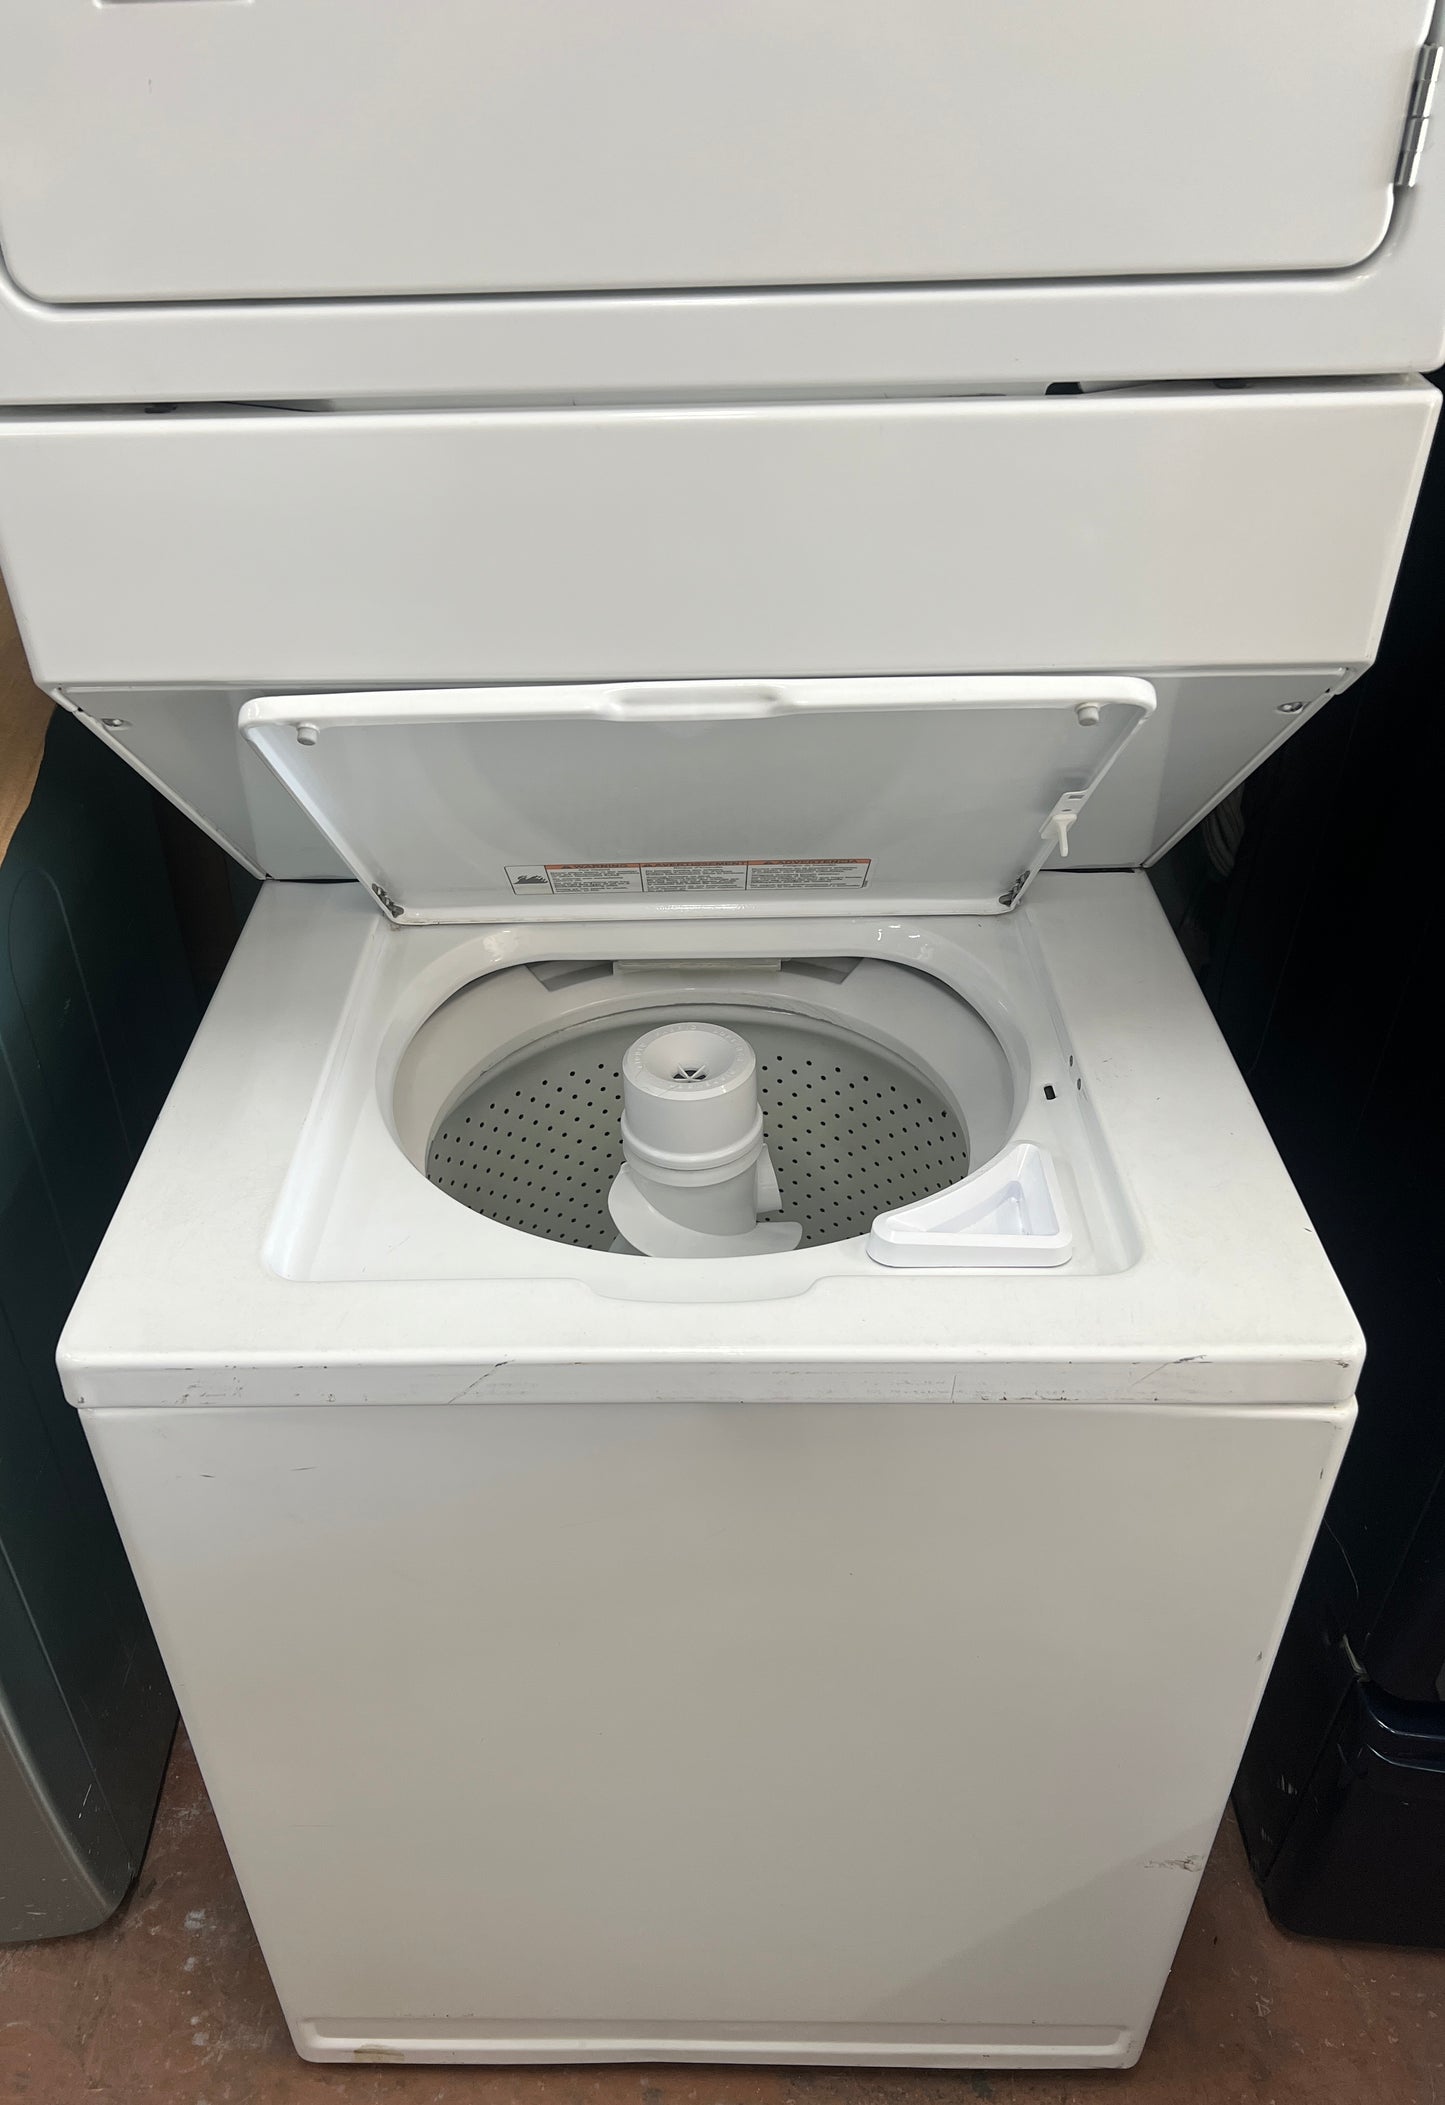 27" Whirlpool Stackable Electric Dryer in White 888183 wet3300sq0